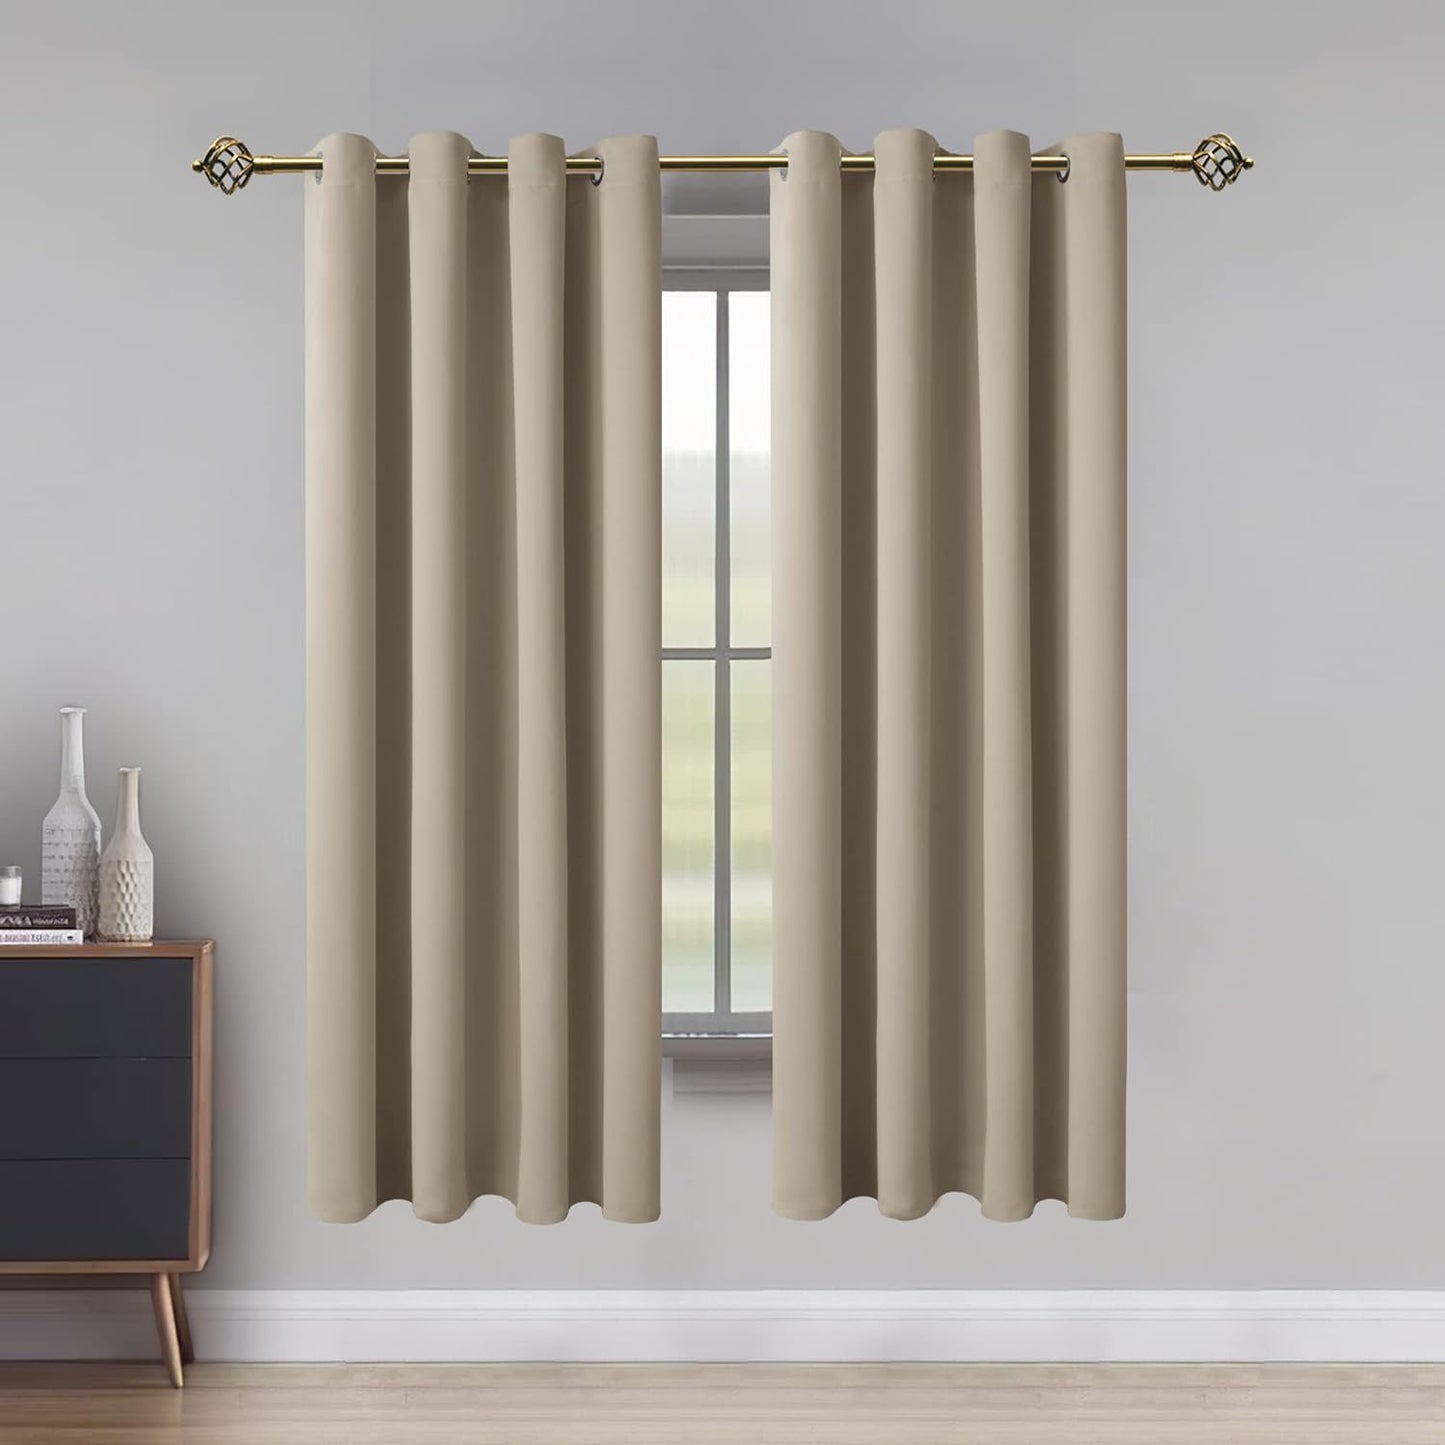 LUSHLEAF Blackout Curtains for Bedroom, Solid Thermal Insulated with Grommet Noise Reduction Window Drapes, Room Darkening Curtains for Living Room, 2 Panels, 52 X 63 Inch Grey  SHEEROOM Light Beige 52 X 72 Inch 